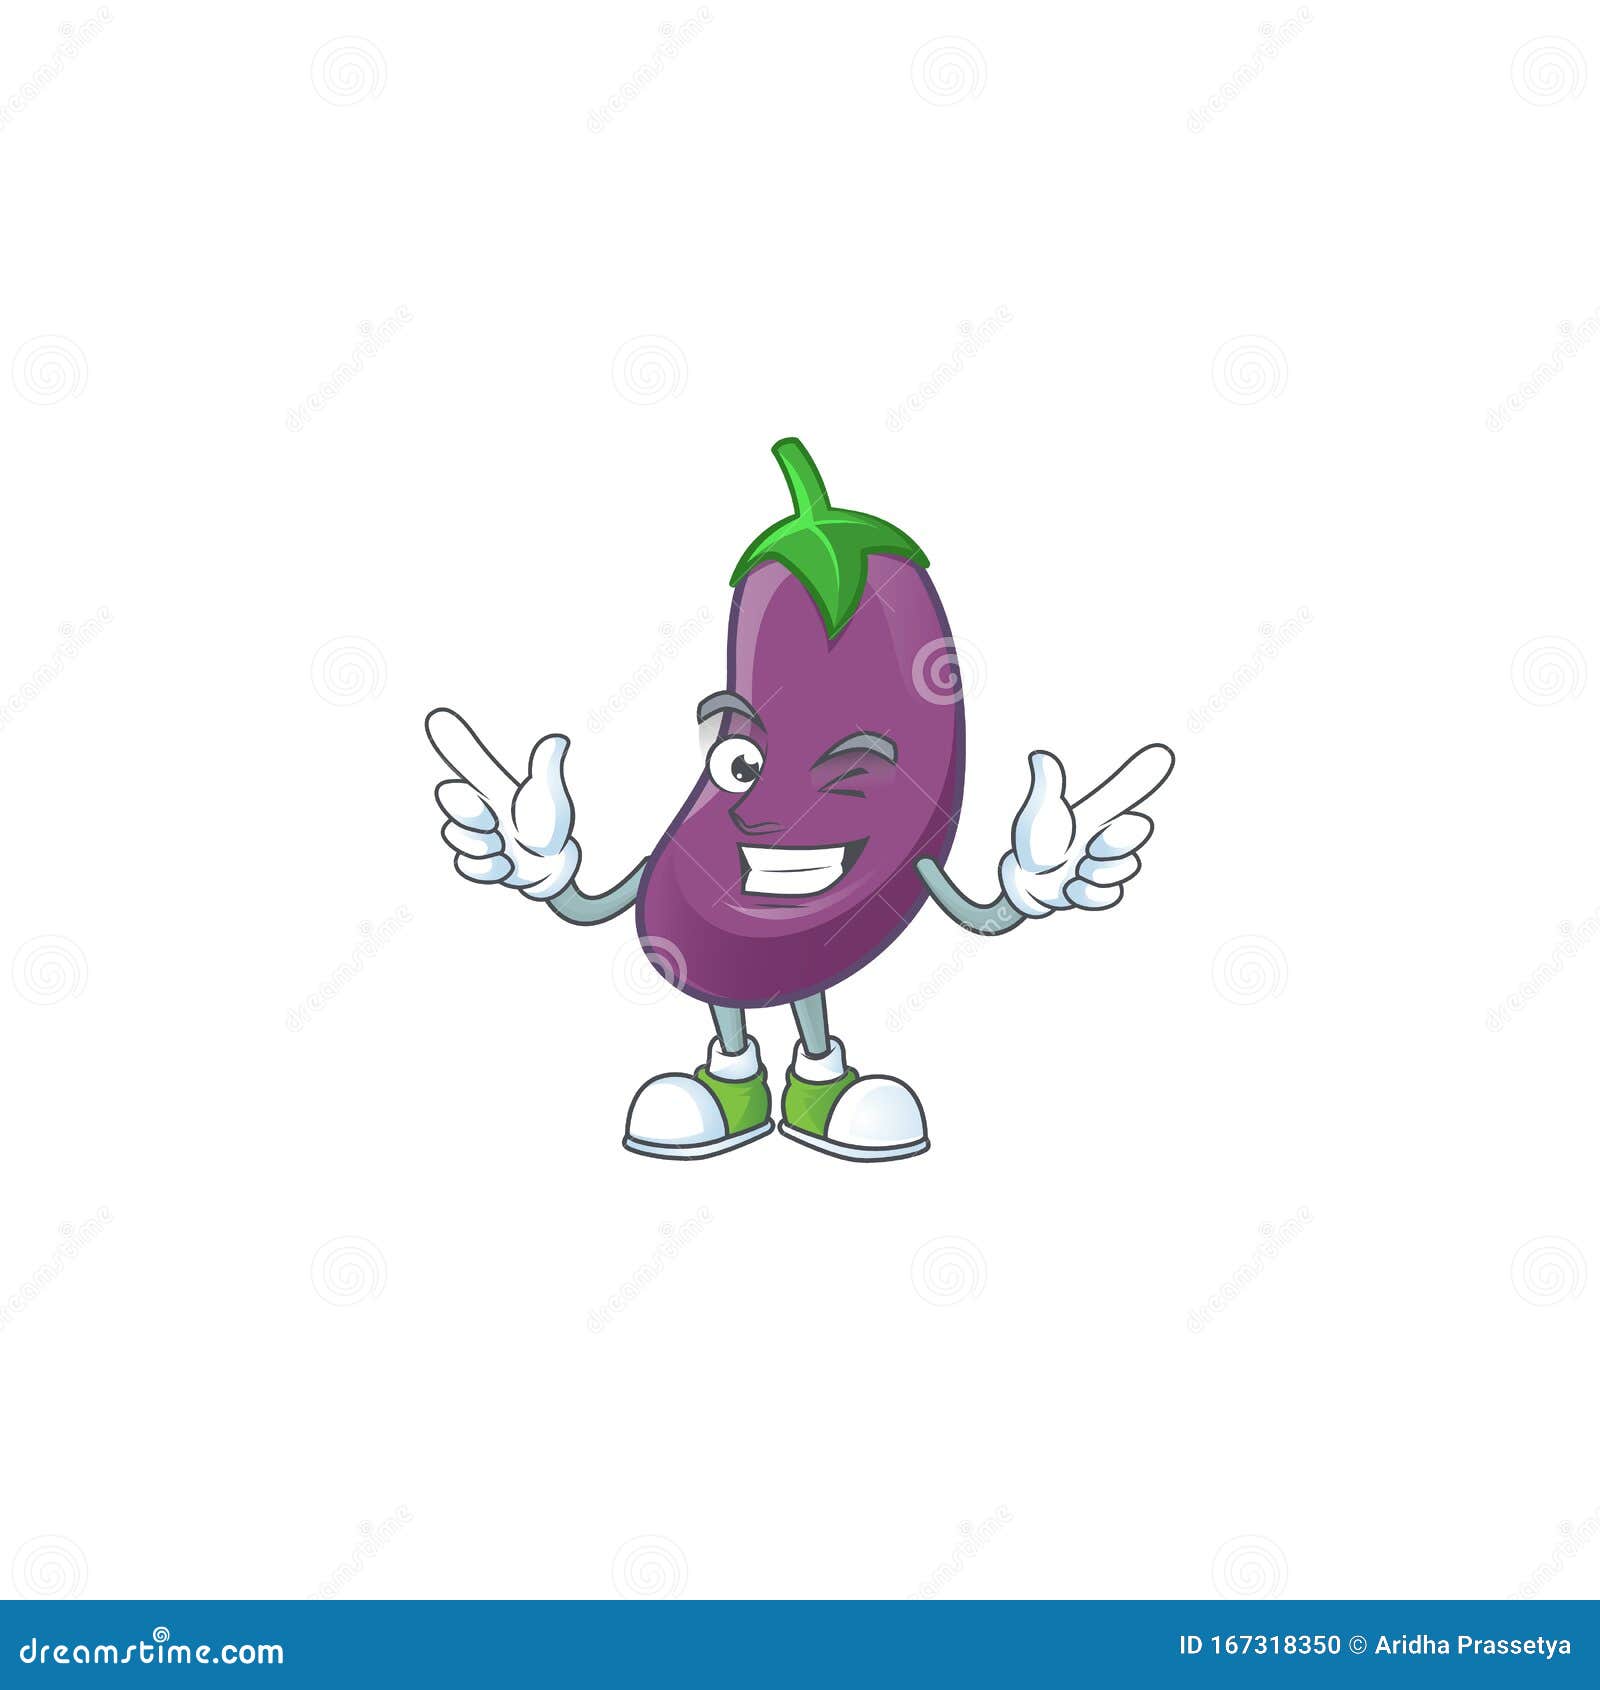 Funny Eggplant Cartoon Character Style with Wink Eye Stock Vector ...